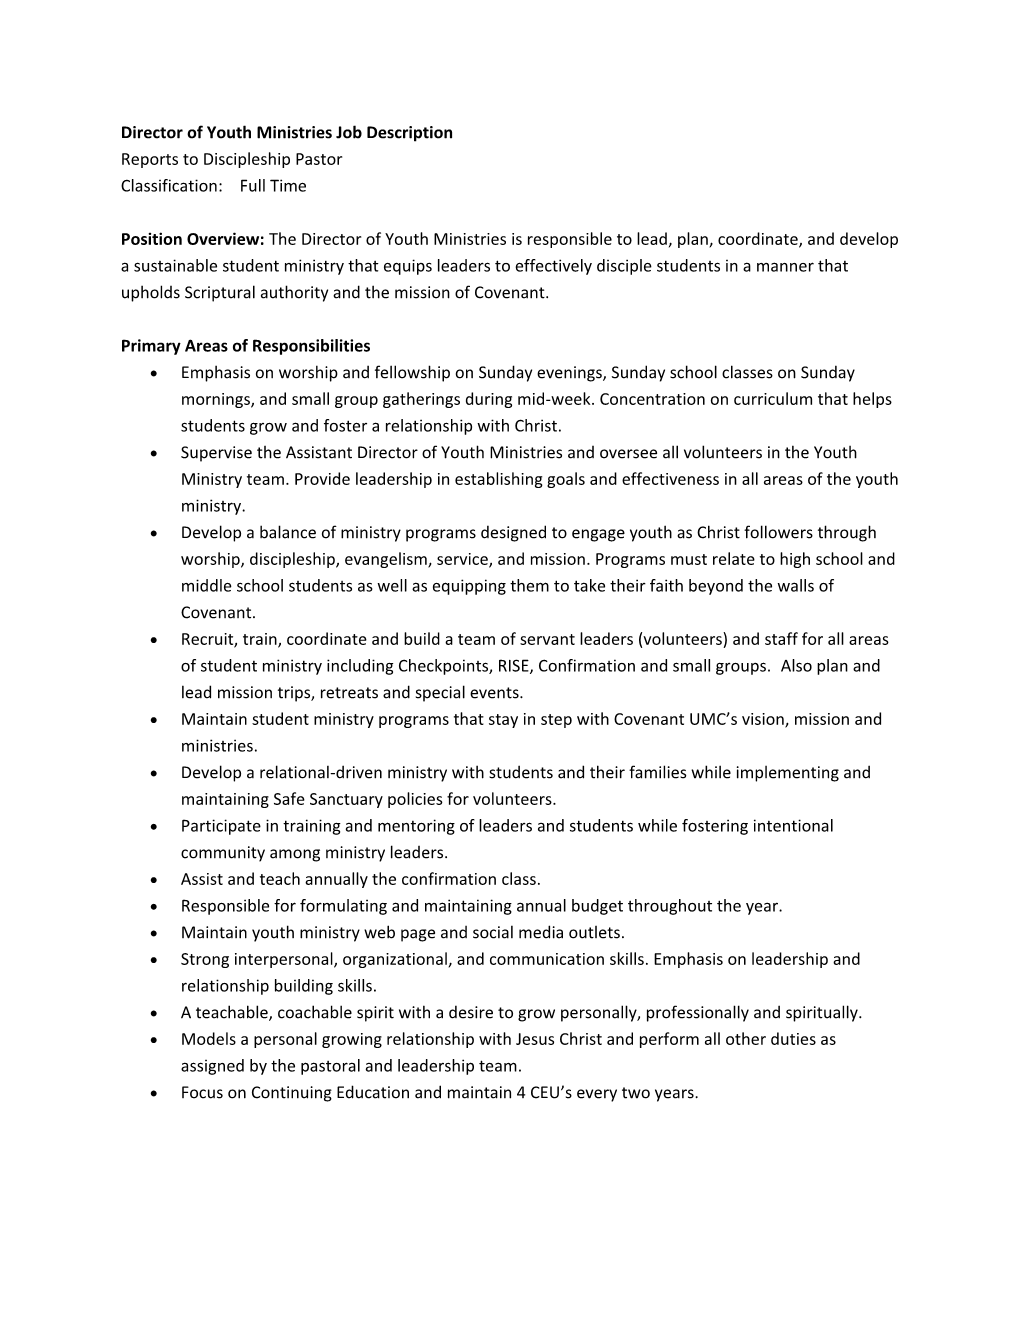 Director of Youth Ministries Job Description